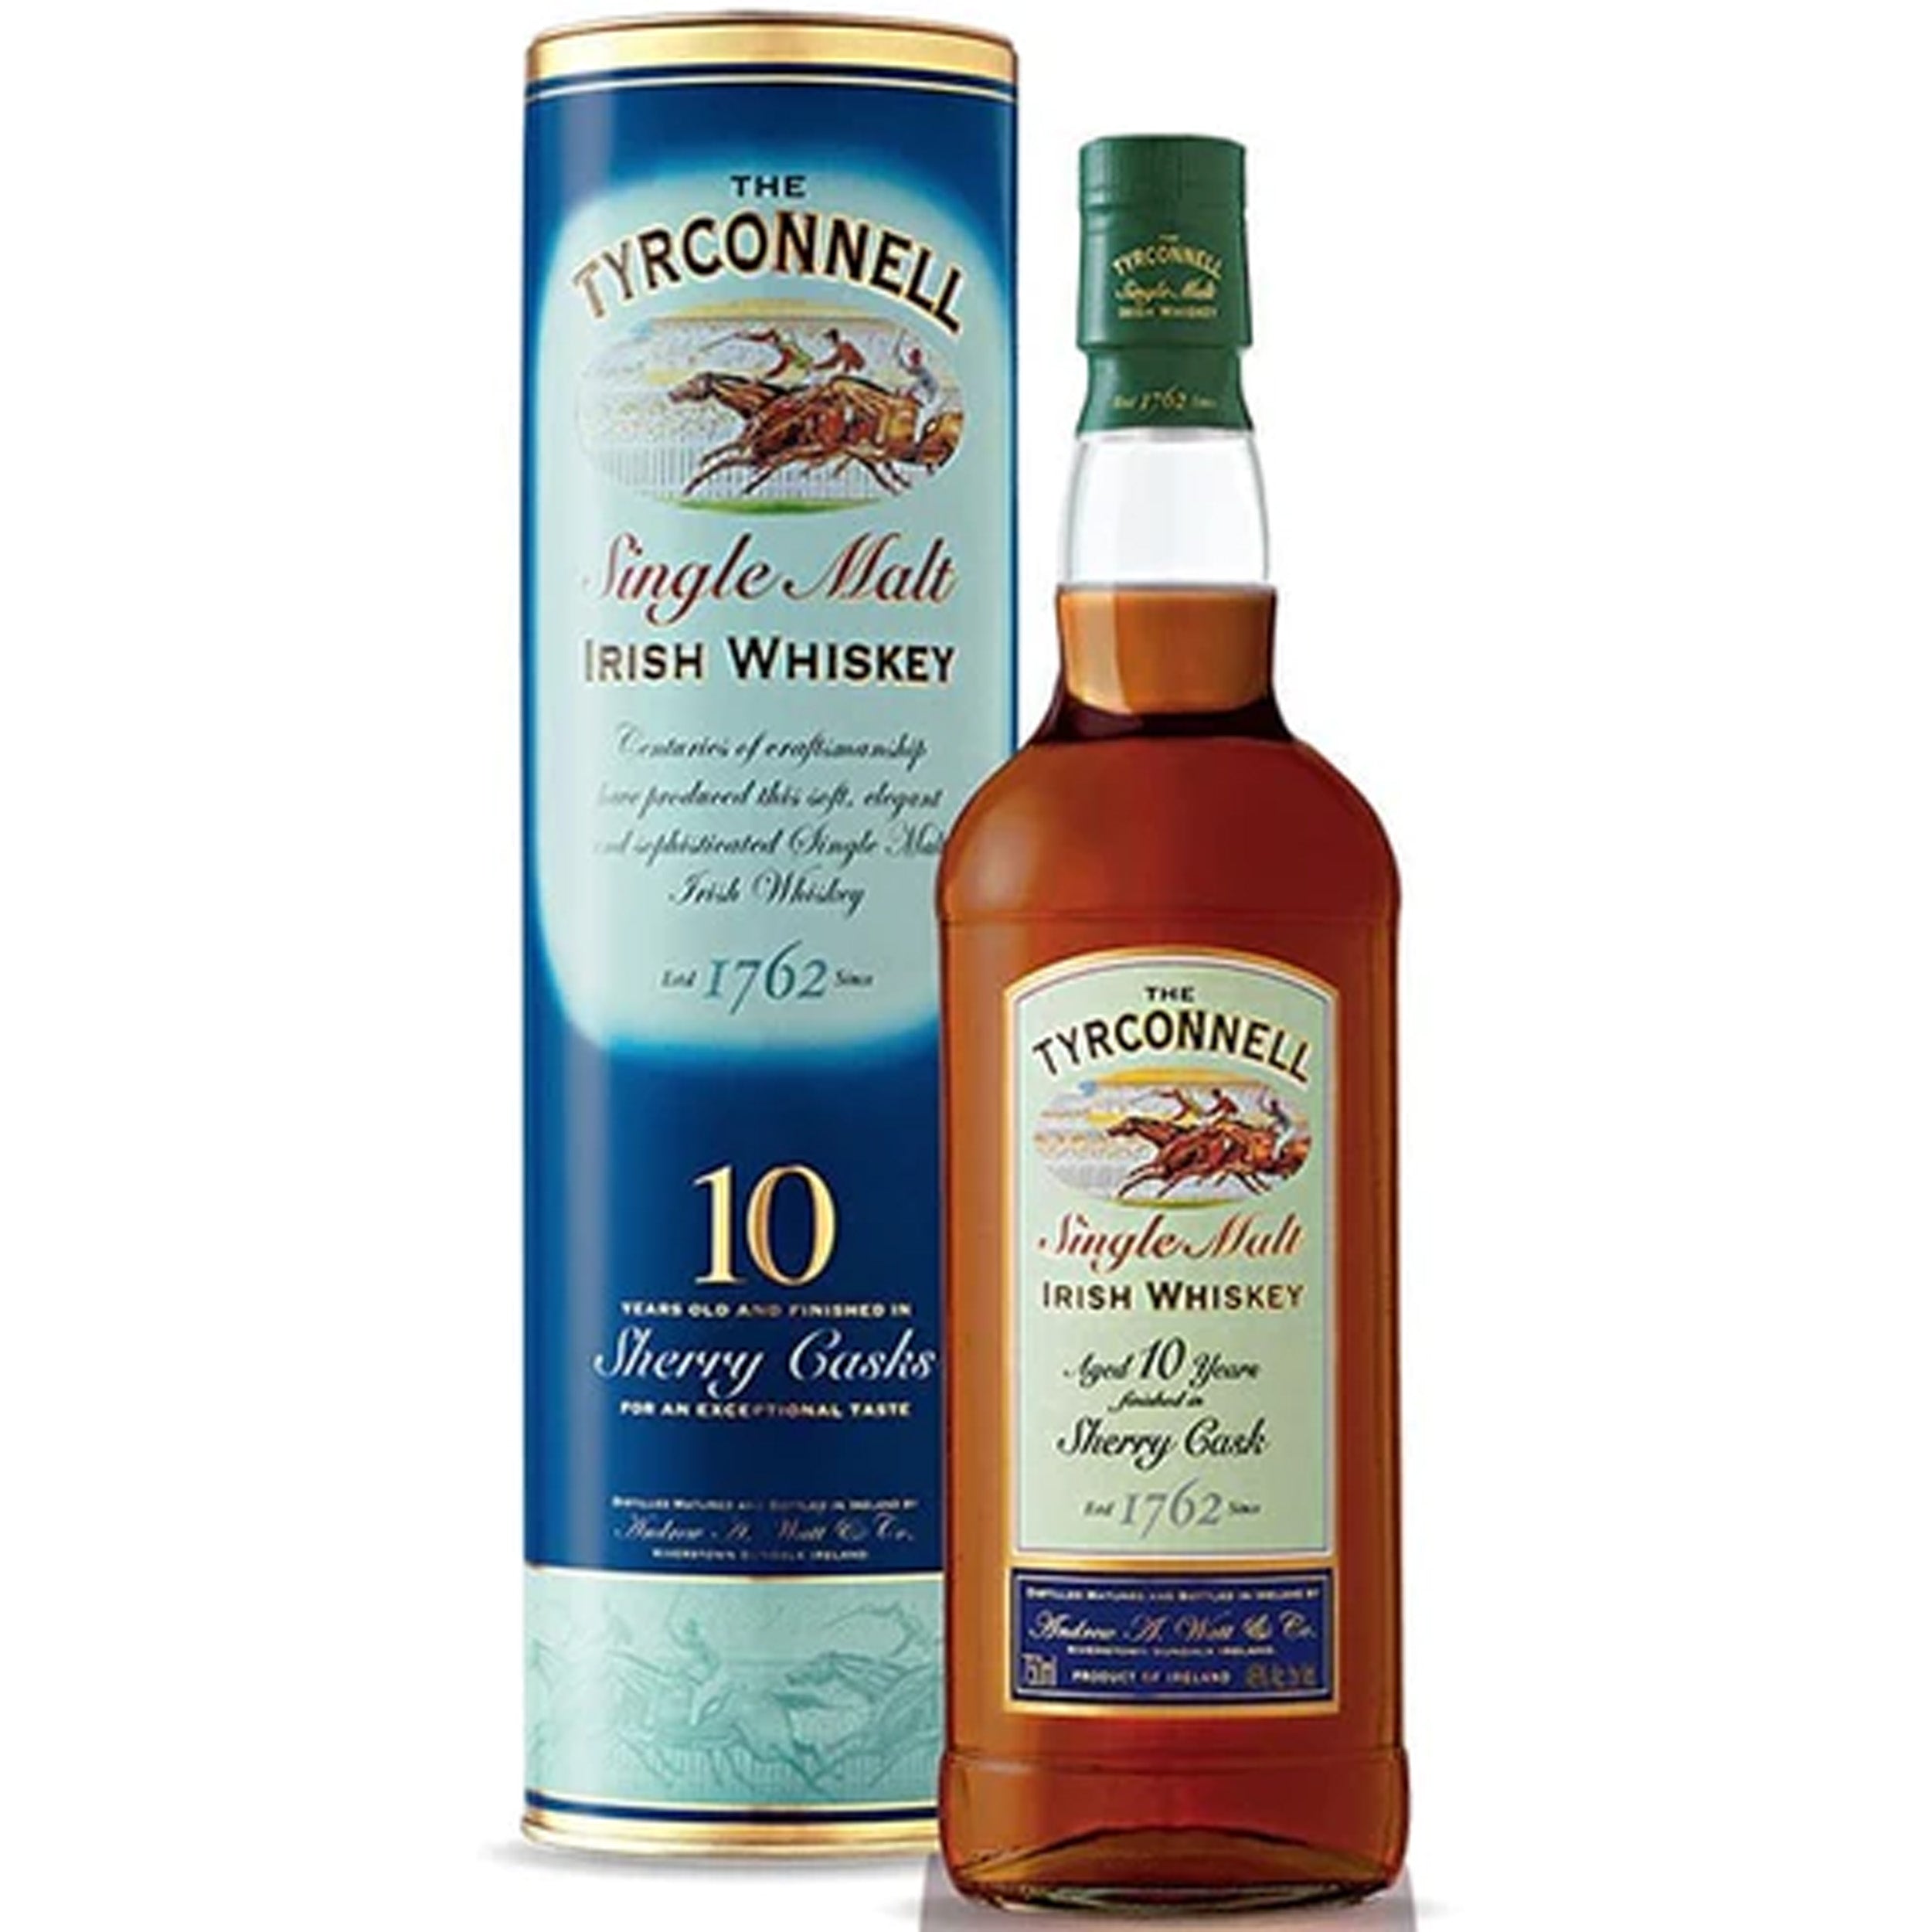 The Tyrconnell 10 Year Old Sherry Cask Finish Irish Whiskey